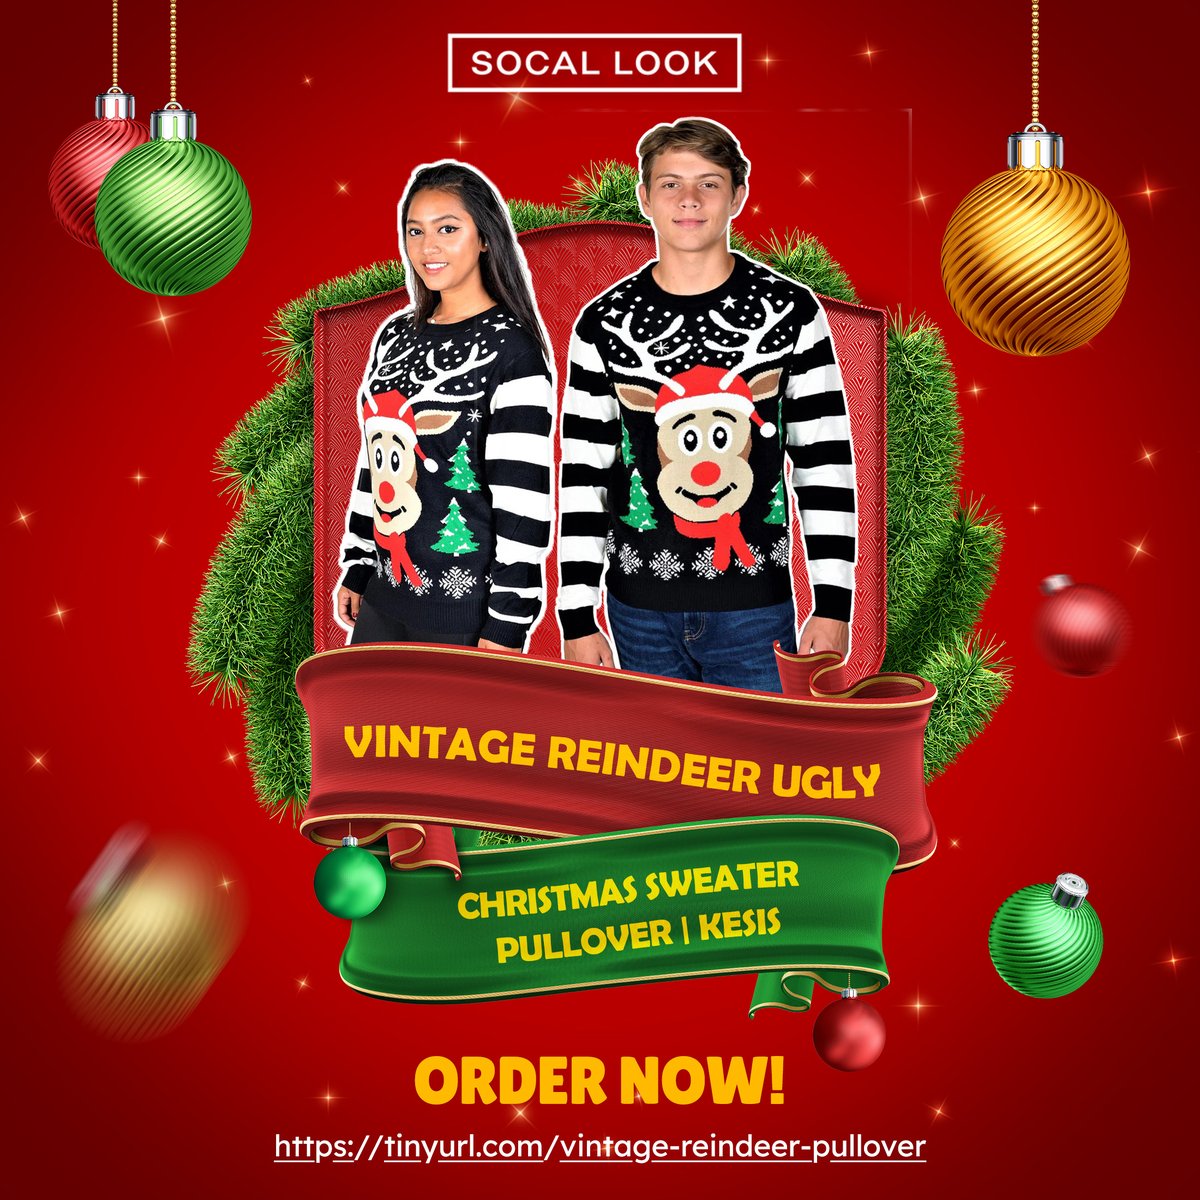 🎄 Rock your holiday style with our Vintage Reindeer Ugly Christmas Sweater Pullover! #festivalstyle #UglySweaterSeason #Reindeermagic 🎁 Share the warmth and join the jolly fashion frenzy today. 🎉👗#vintagechristmas #uglysweaterlove #kesis tinyurl.com/vintage-reinde…